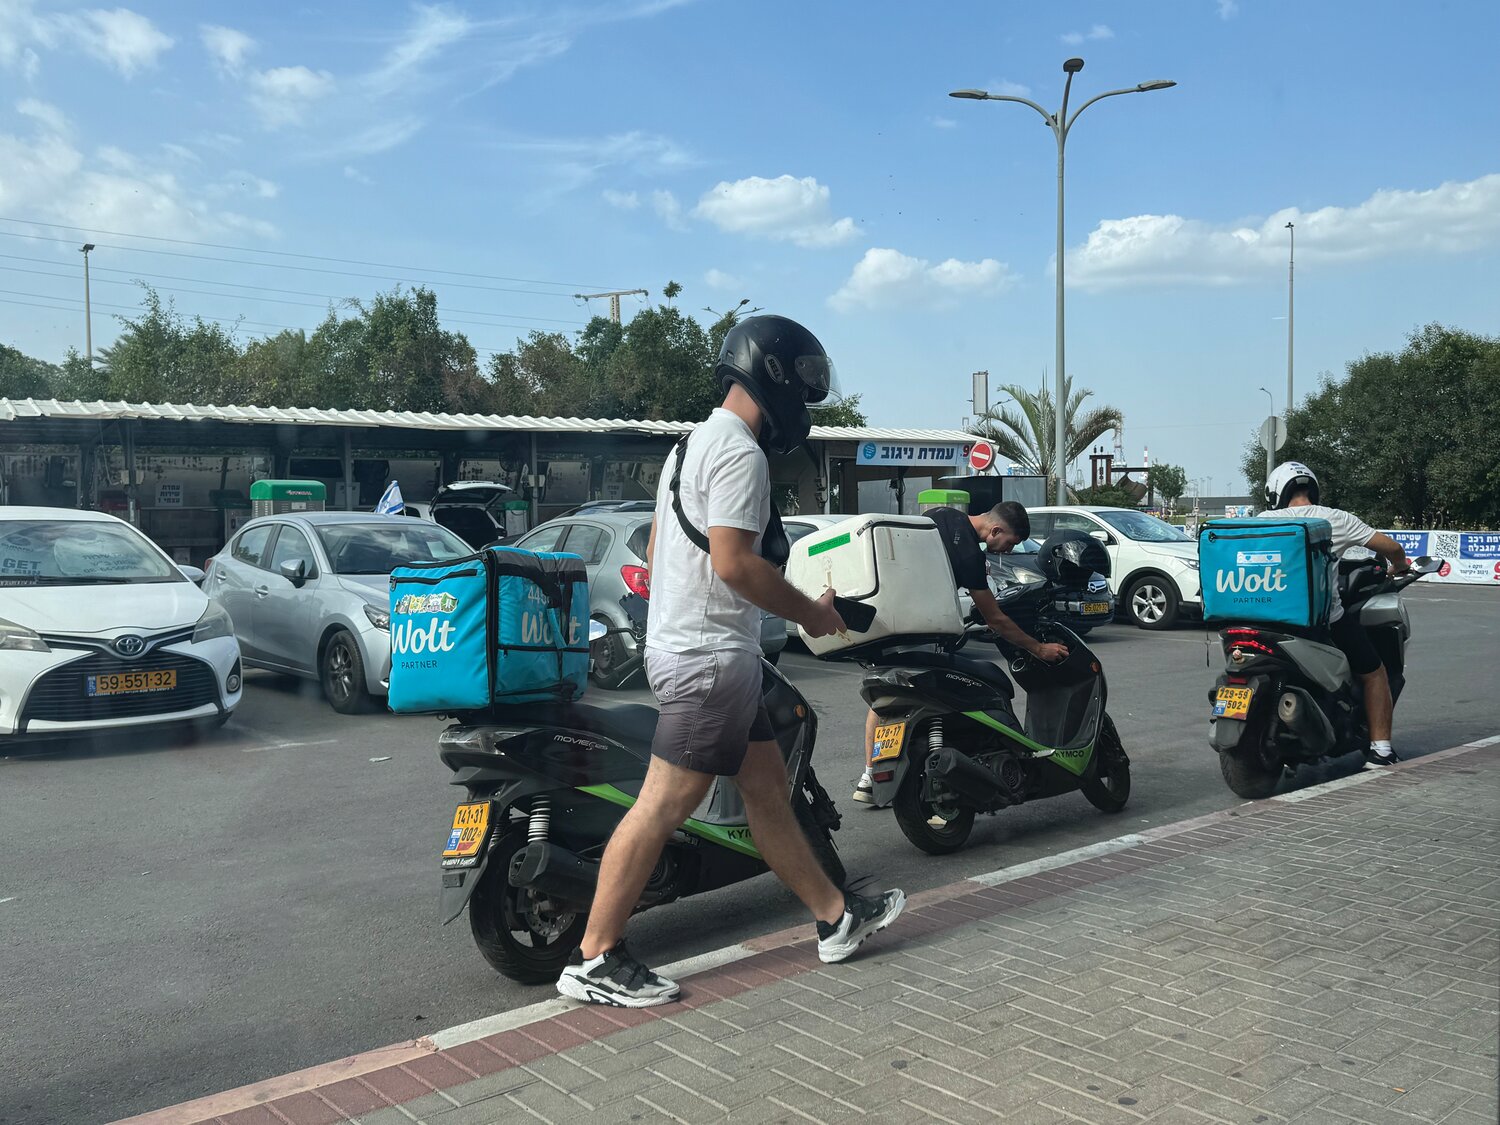 Despite daily rocket attacks, food deliveries continue, as life goes on in Ashdod, Israel, a commercial port city about 15 miles north of the Gaza Strip.